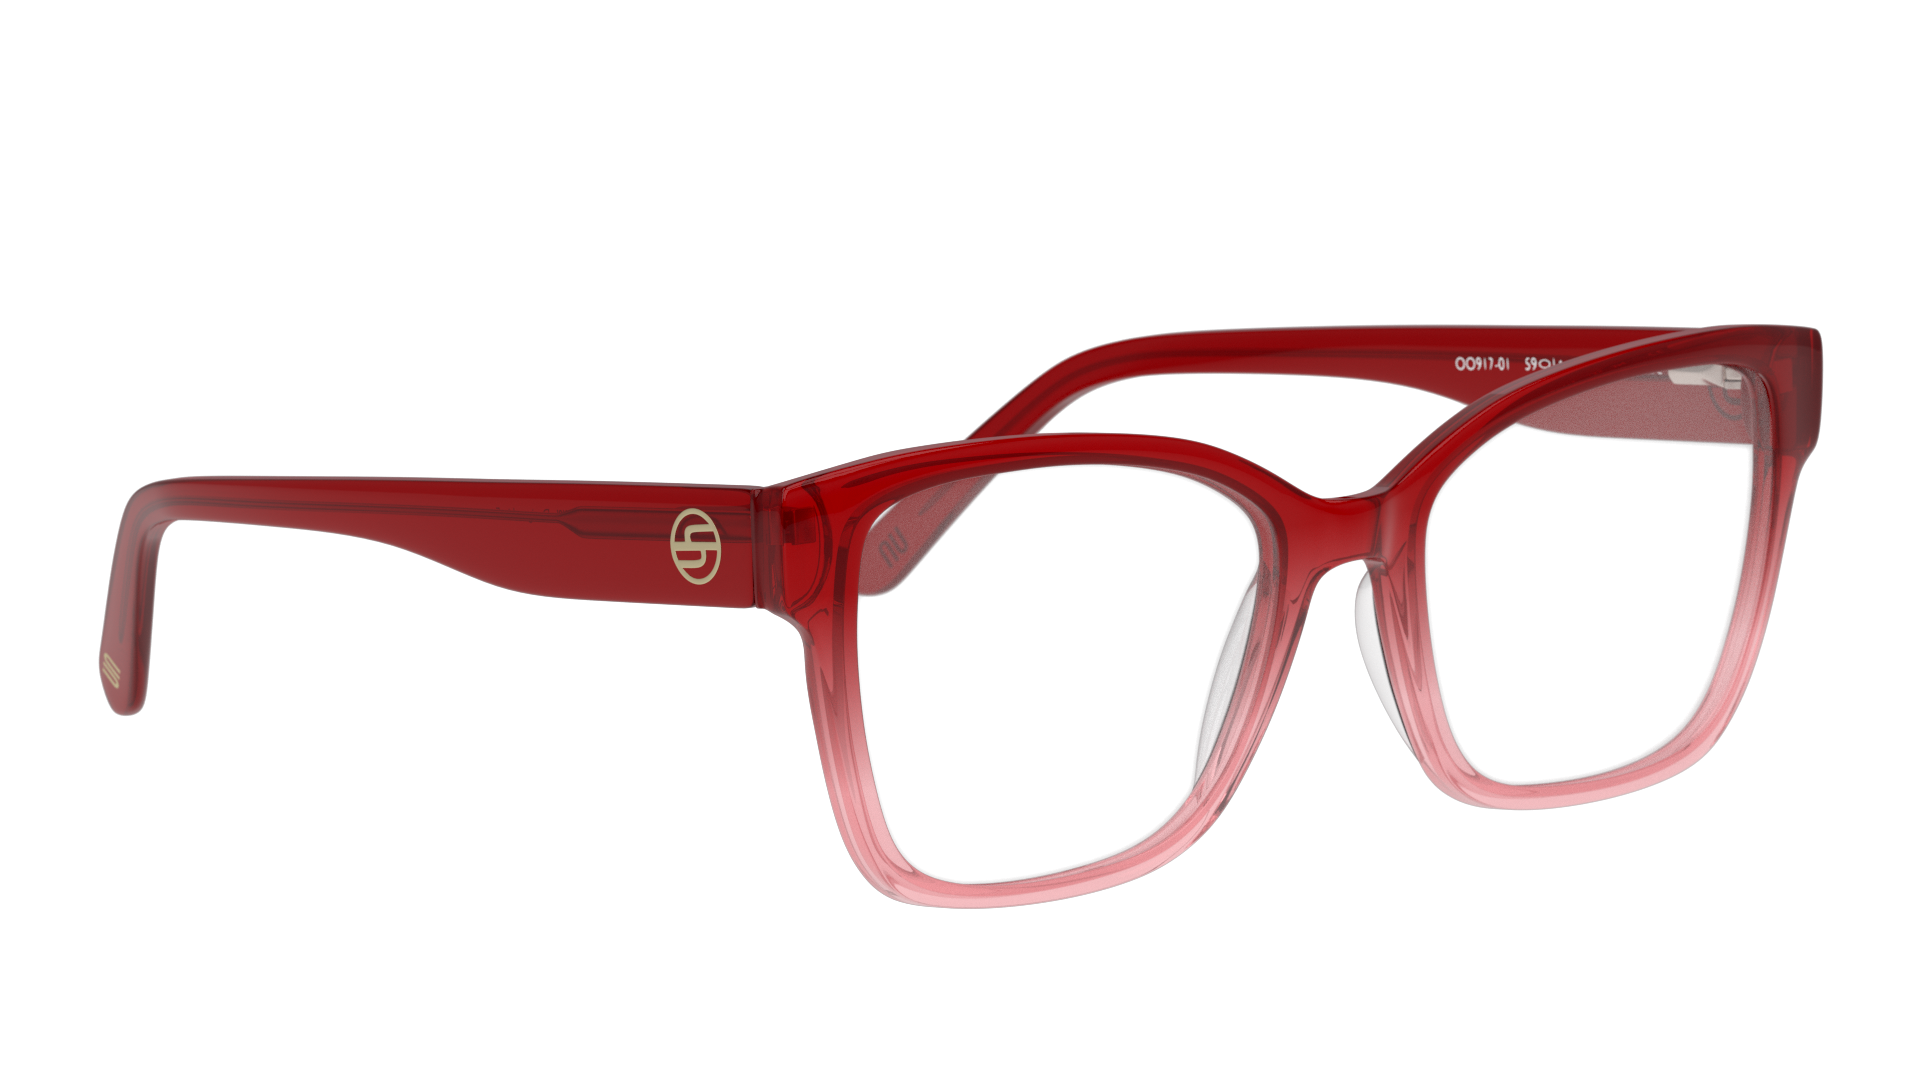 Angle_Right01 Unofficial UNOF0361 (UU00) Glasses Transparent / Burgundy